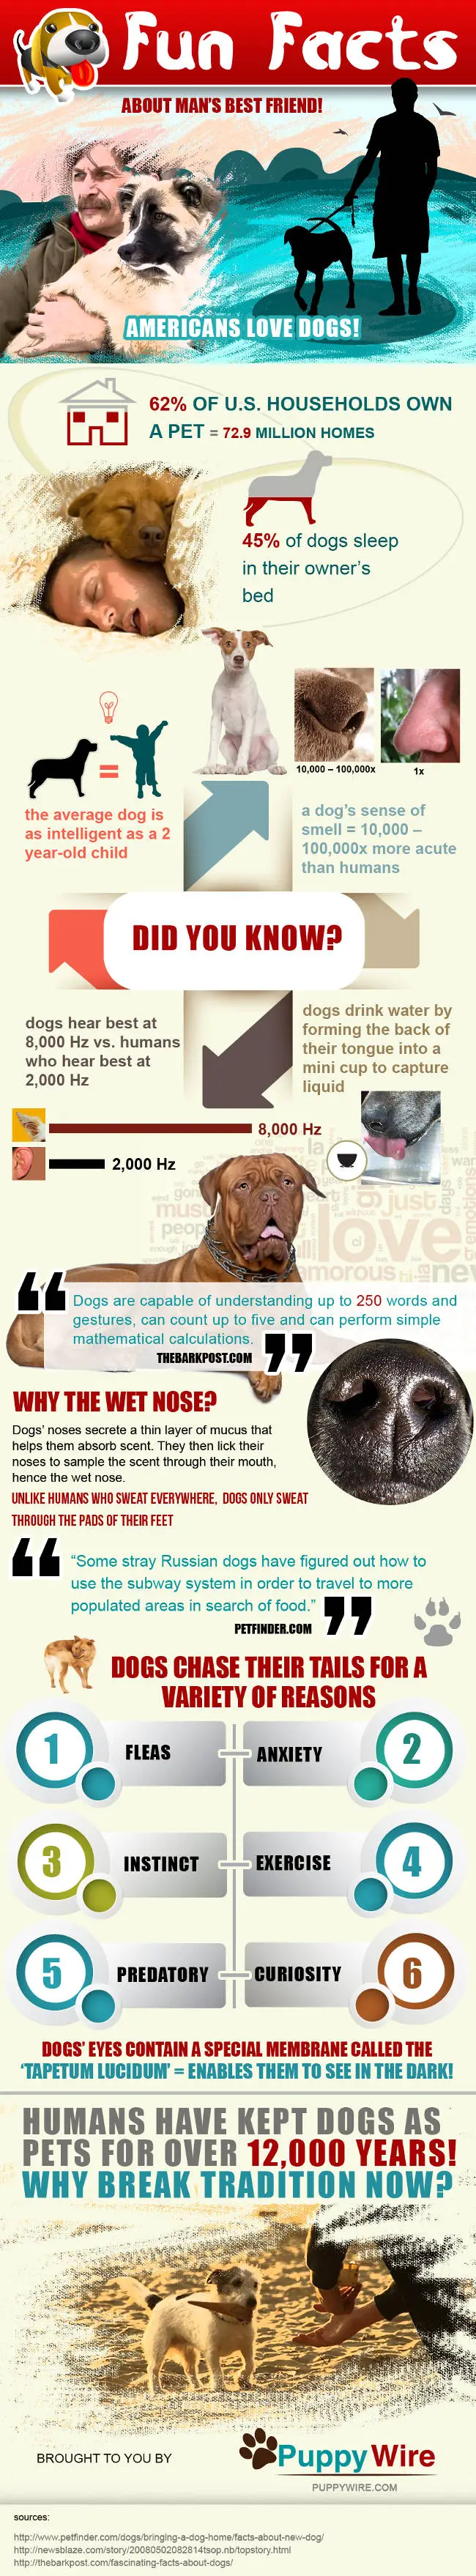 PuppyWire's Fun Facts About Man's Best Friend Infographic